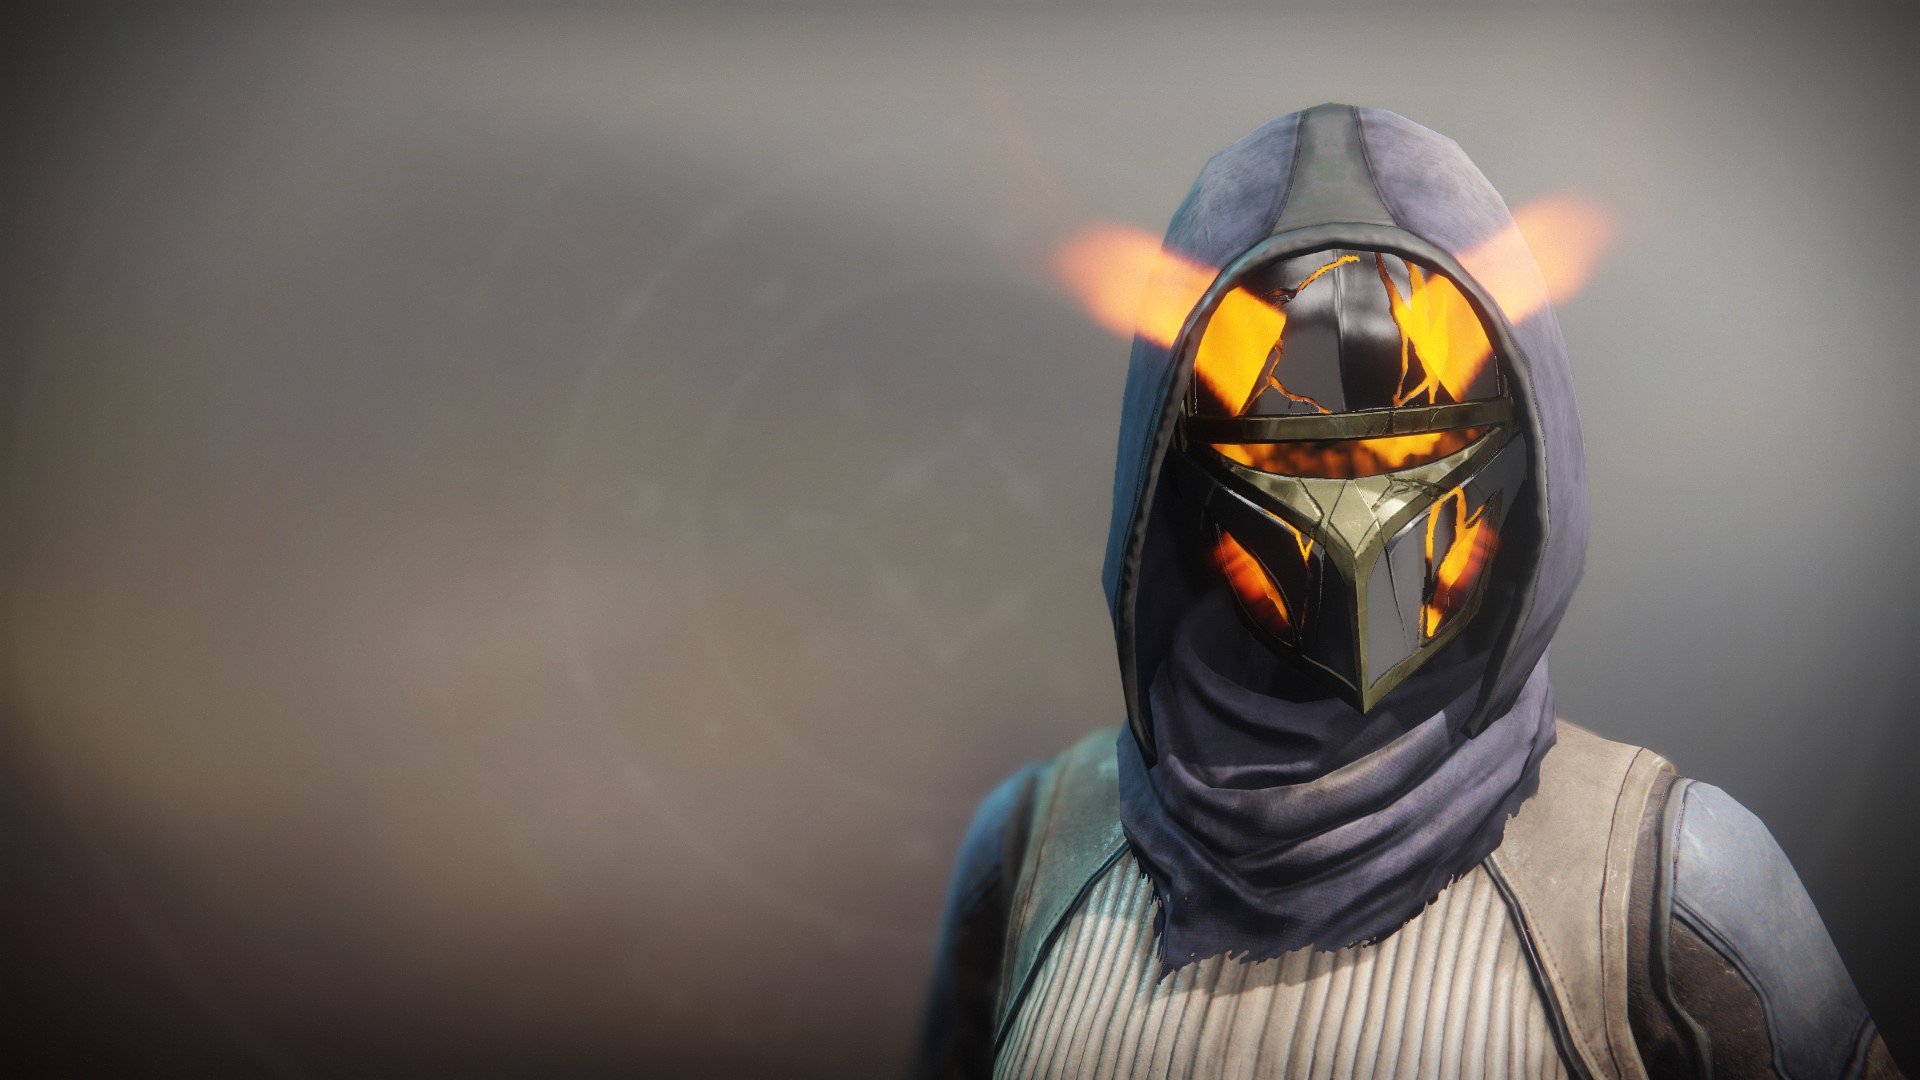 An in-game render of the Solstice Mask (Magnificent).